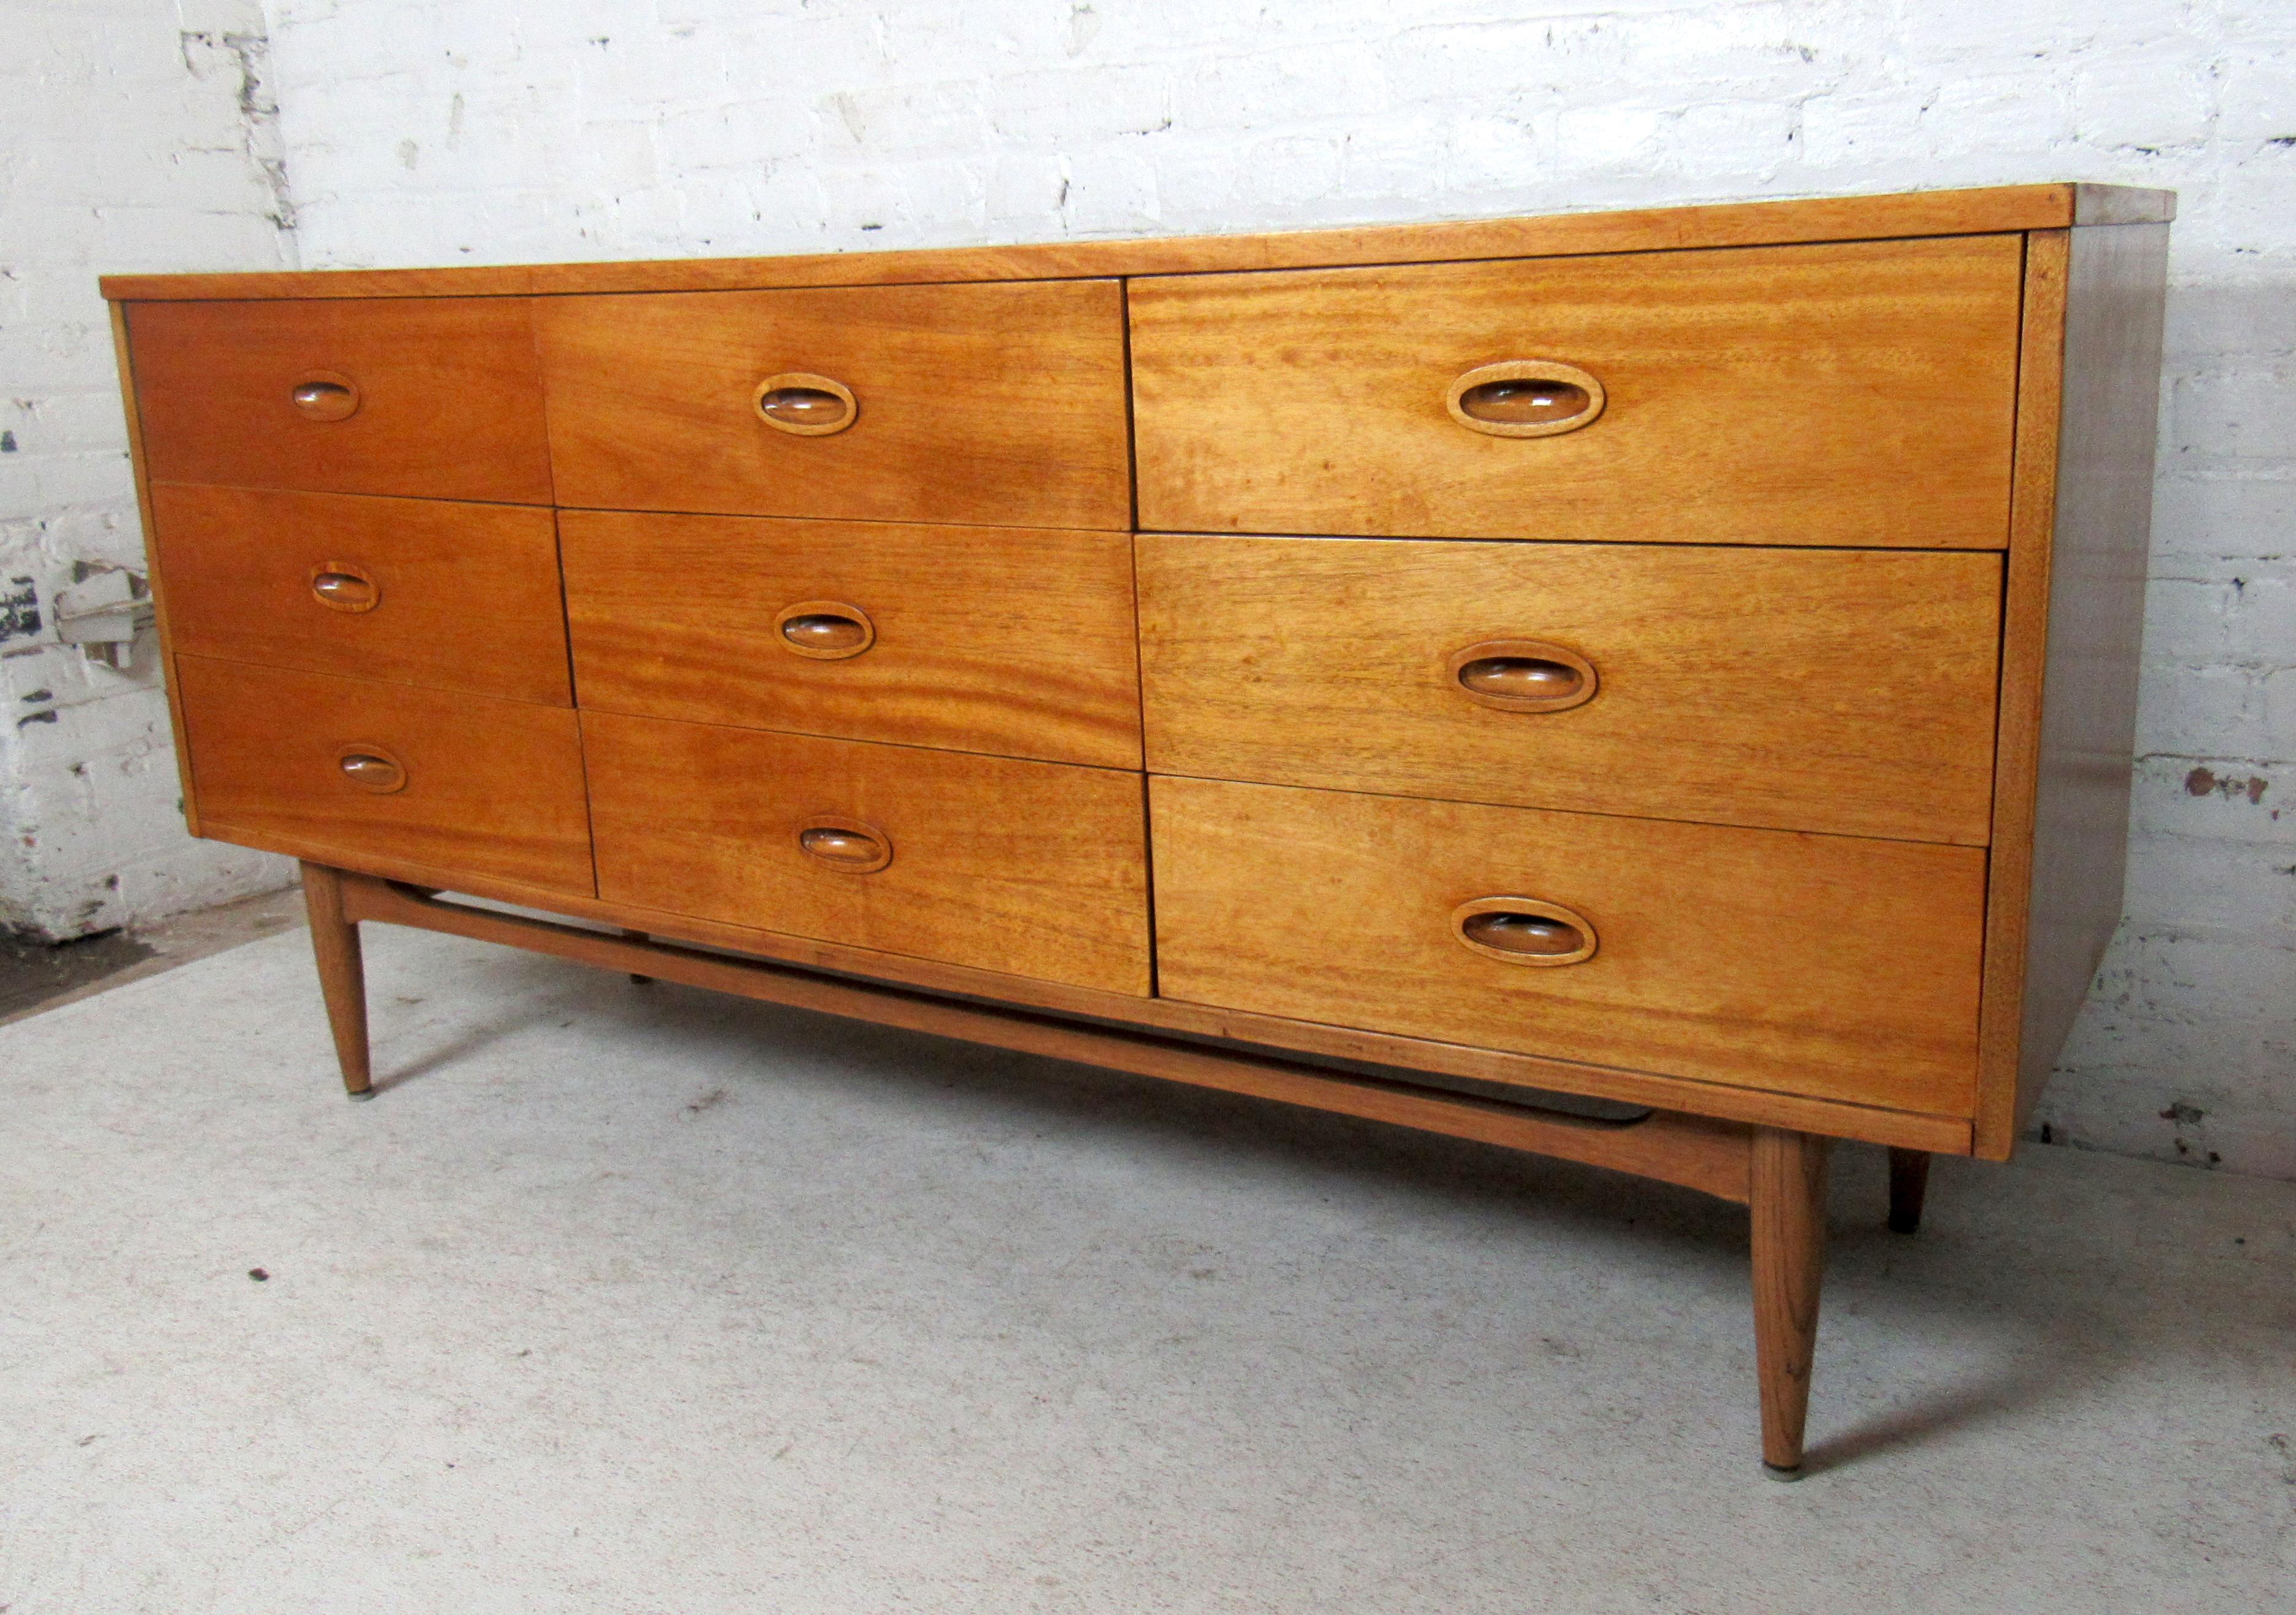 Sleek Mid-Century Modern nine drawer dresser featured in rich wood grain on sturdy tapered legs.

(Please confirm item location - NY or NJ - with dealer).